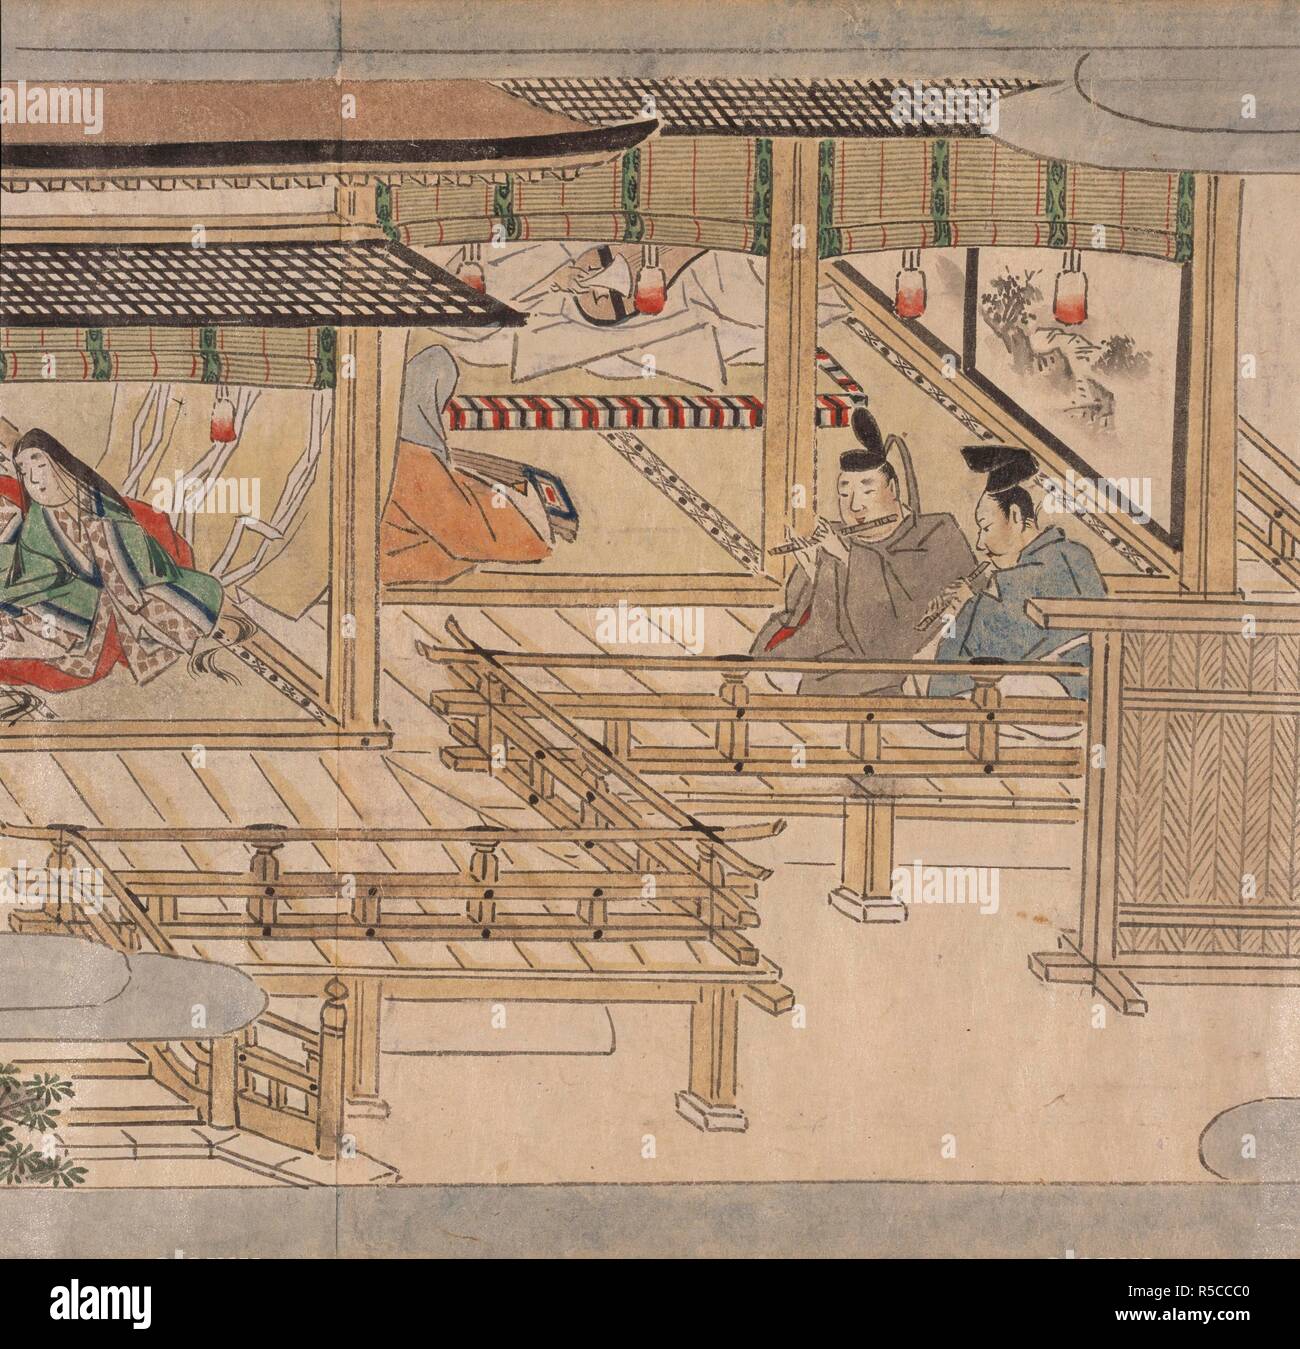 Japanese musicians. 'Shiju no monoarasoi' or 'Poetry Competition on 42. Japan , 1640-1680. Musicians playing flutes, koto and biwa.  Image taken from 'Shiju no monoarasoi' or 'Poetry Competition on 42 subjects'.  Originally published/produced in Japan , 1640-1680. . Source: Or. 903, scroll. Language: Japanese. Stock Photo